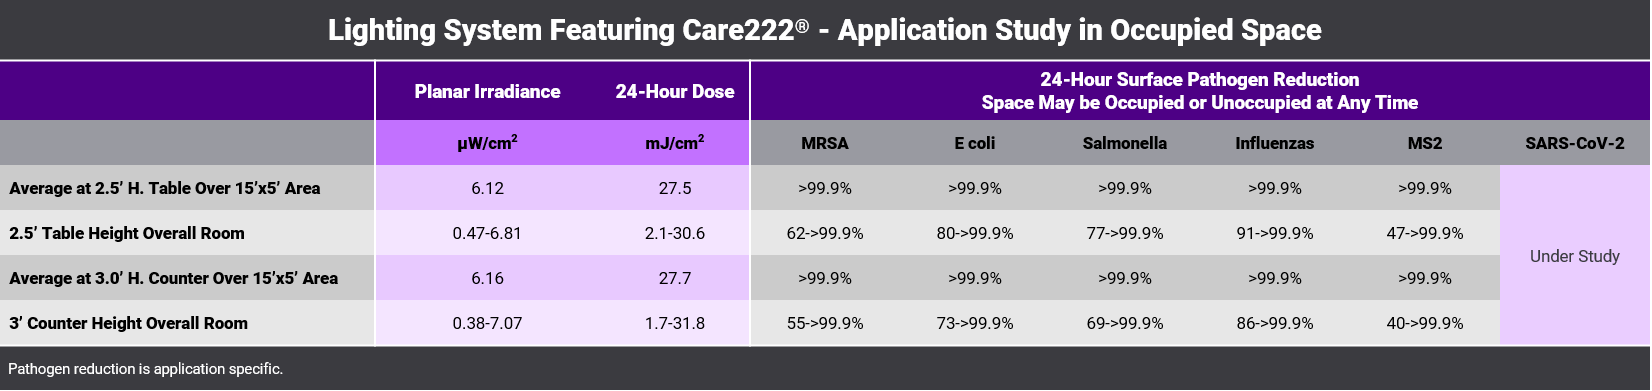 Care222-ApplicationStudy-Table